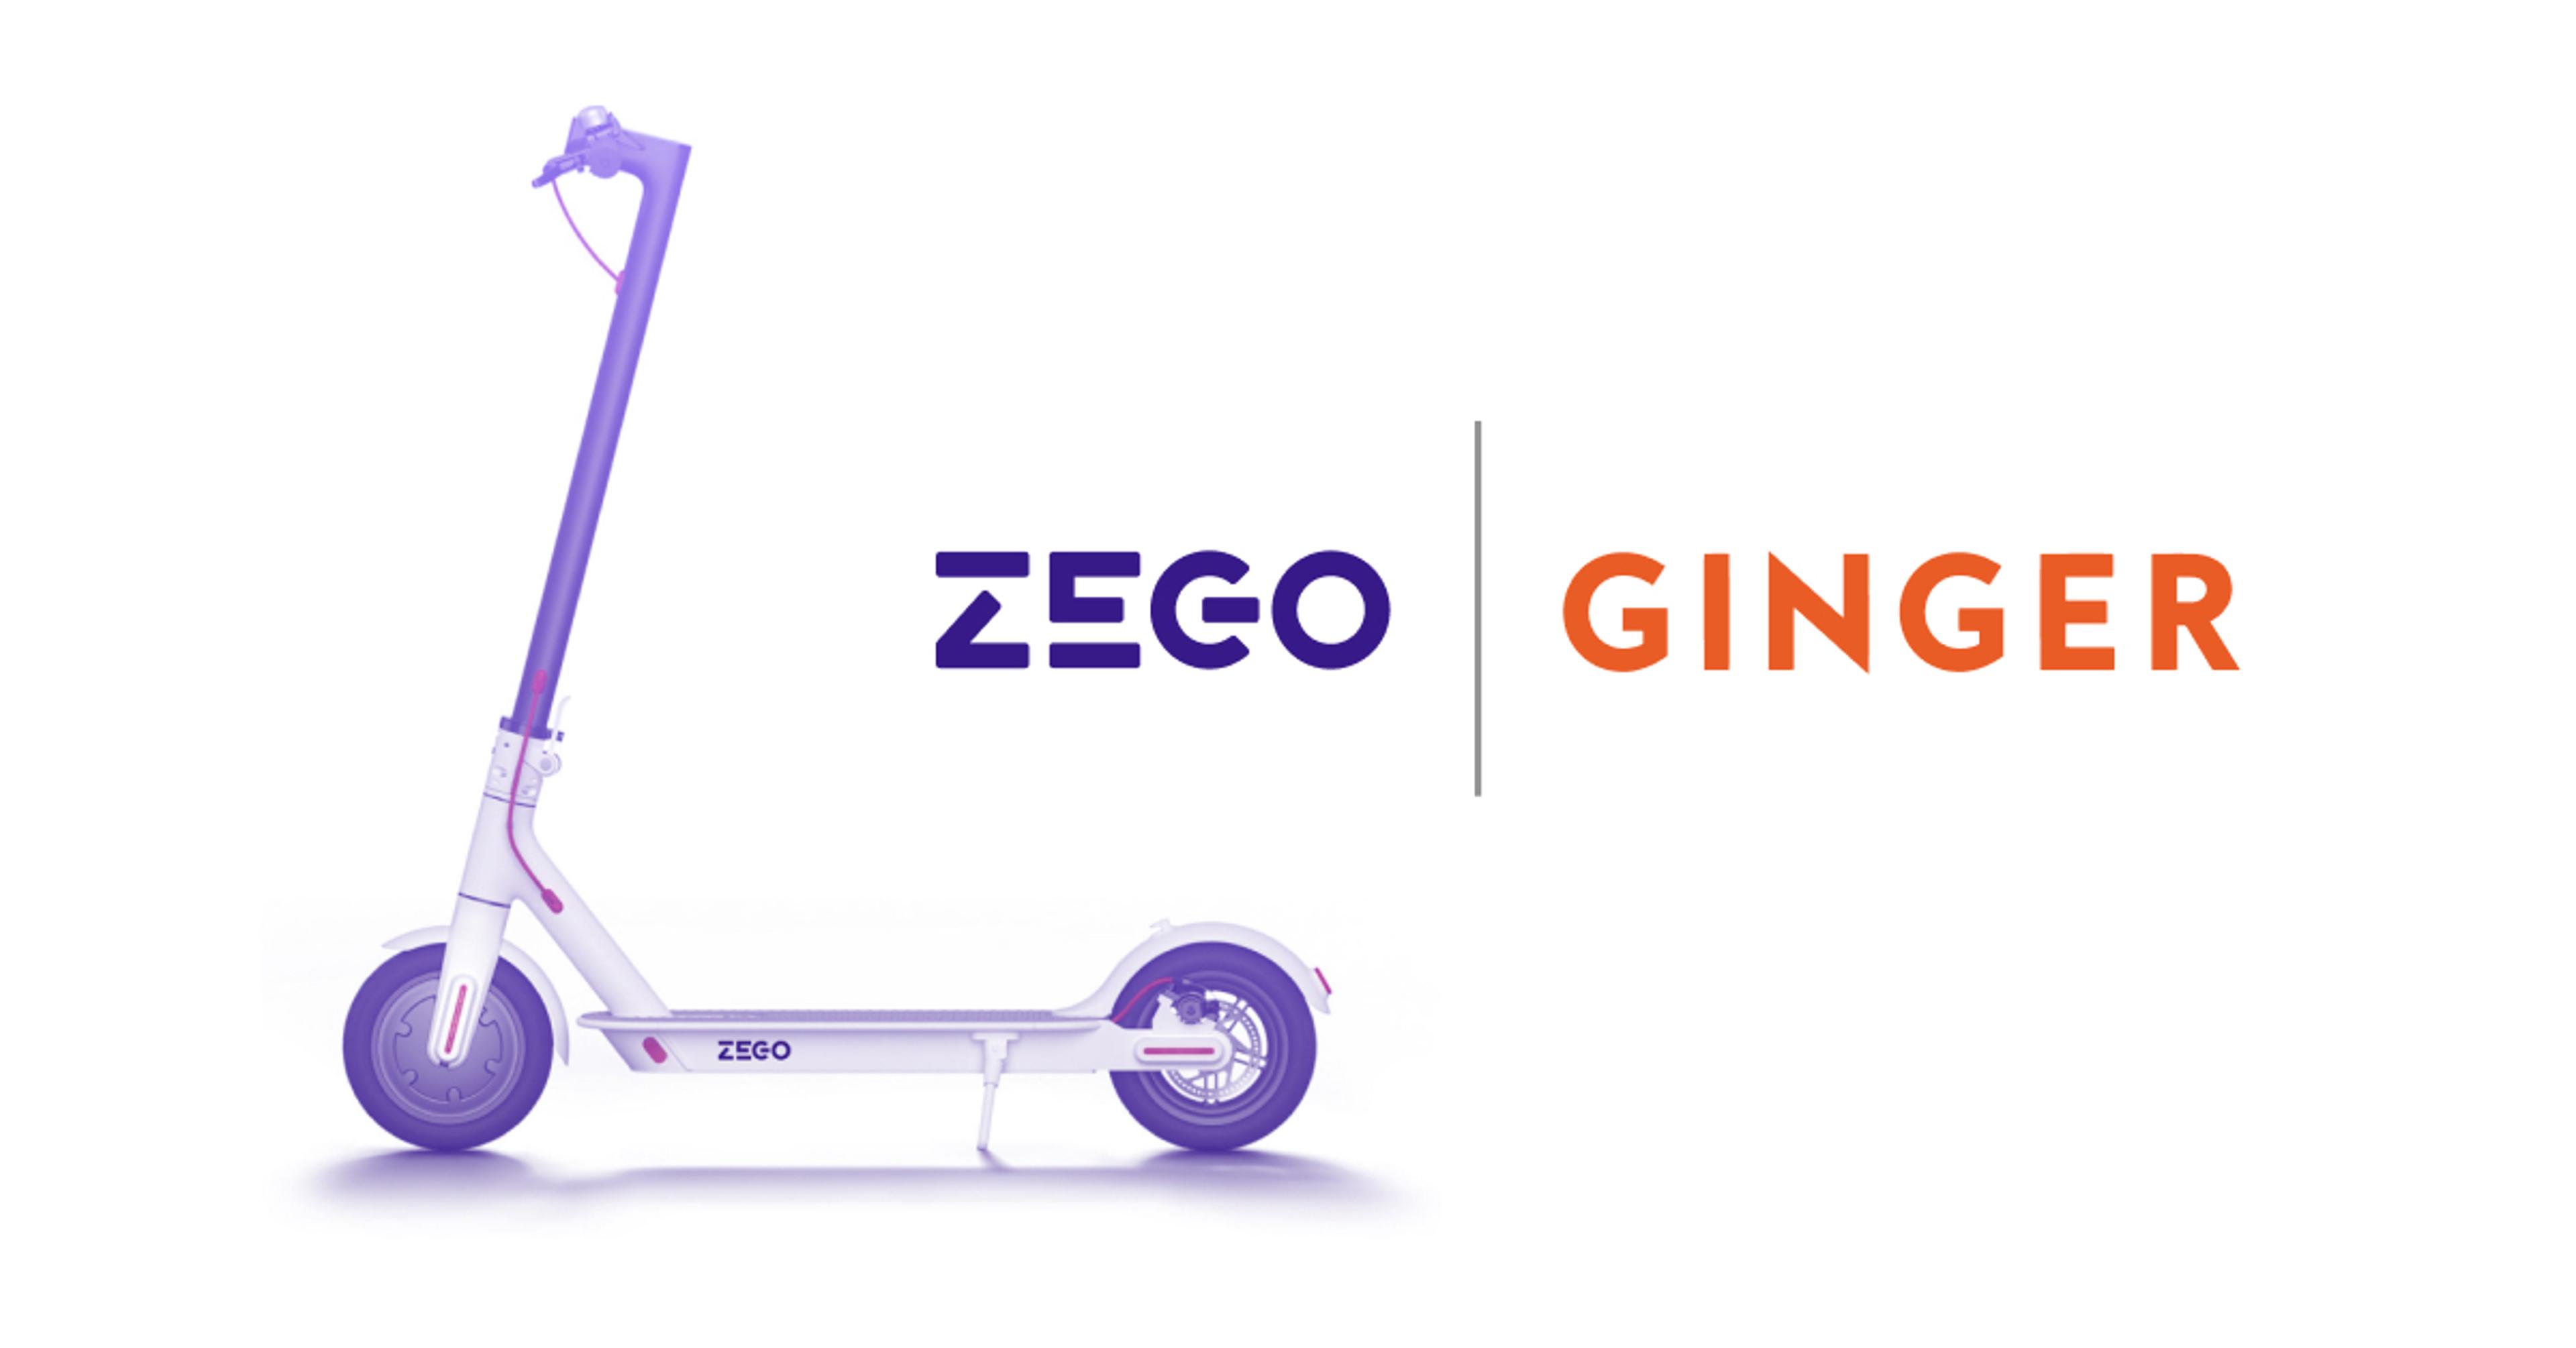 Zego partners with Ginger to support the first e-scooter trial in the UK